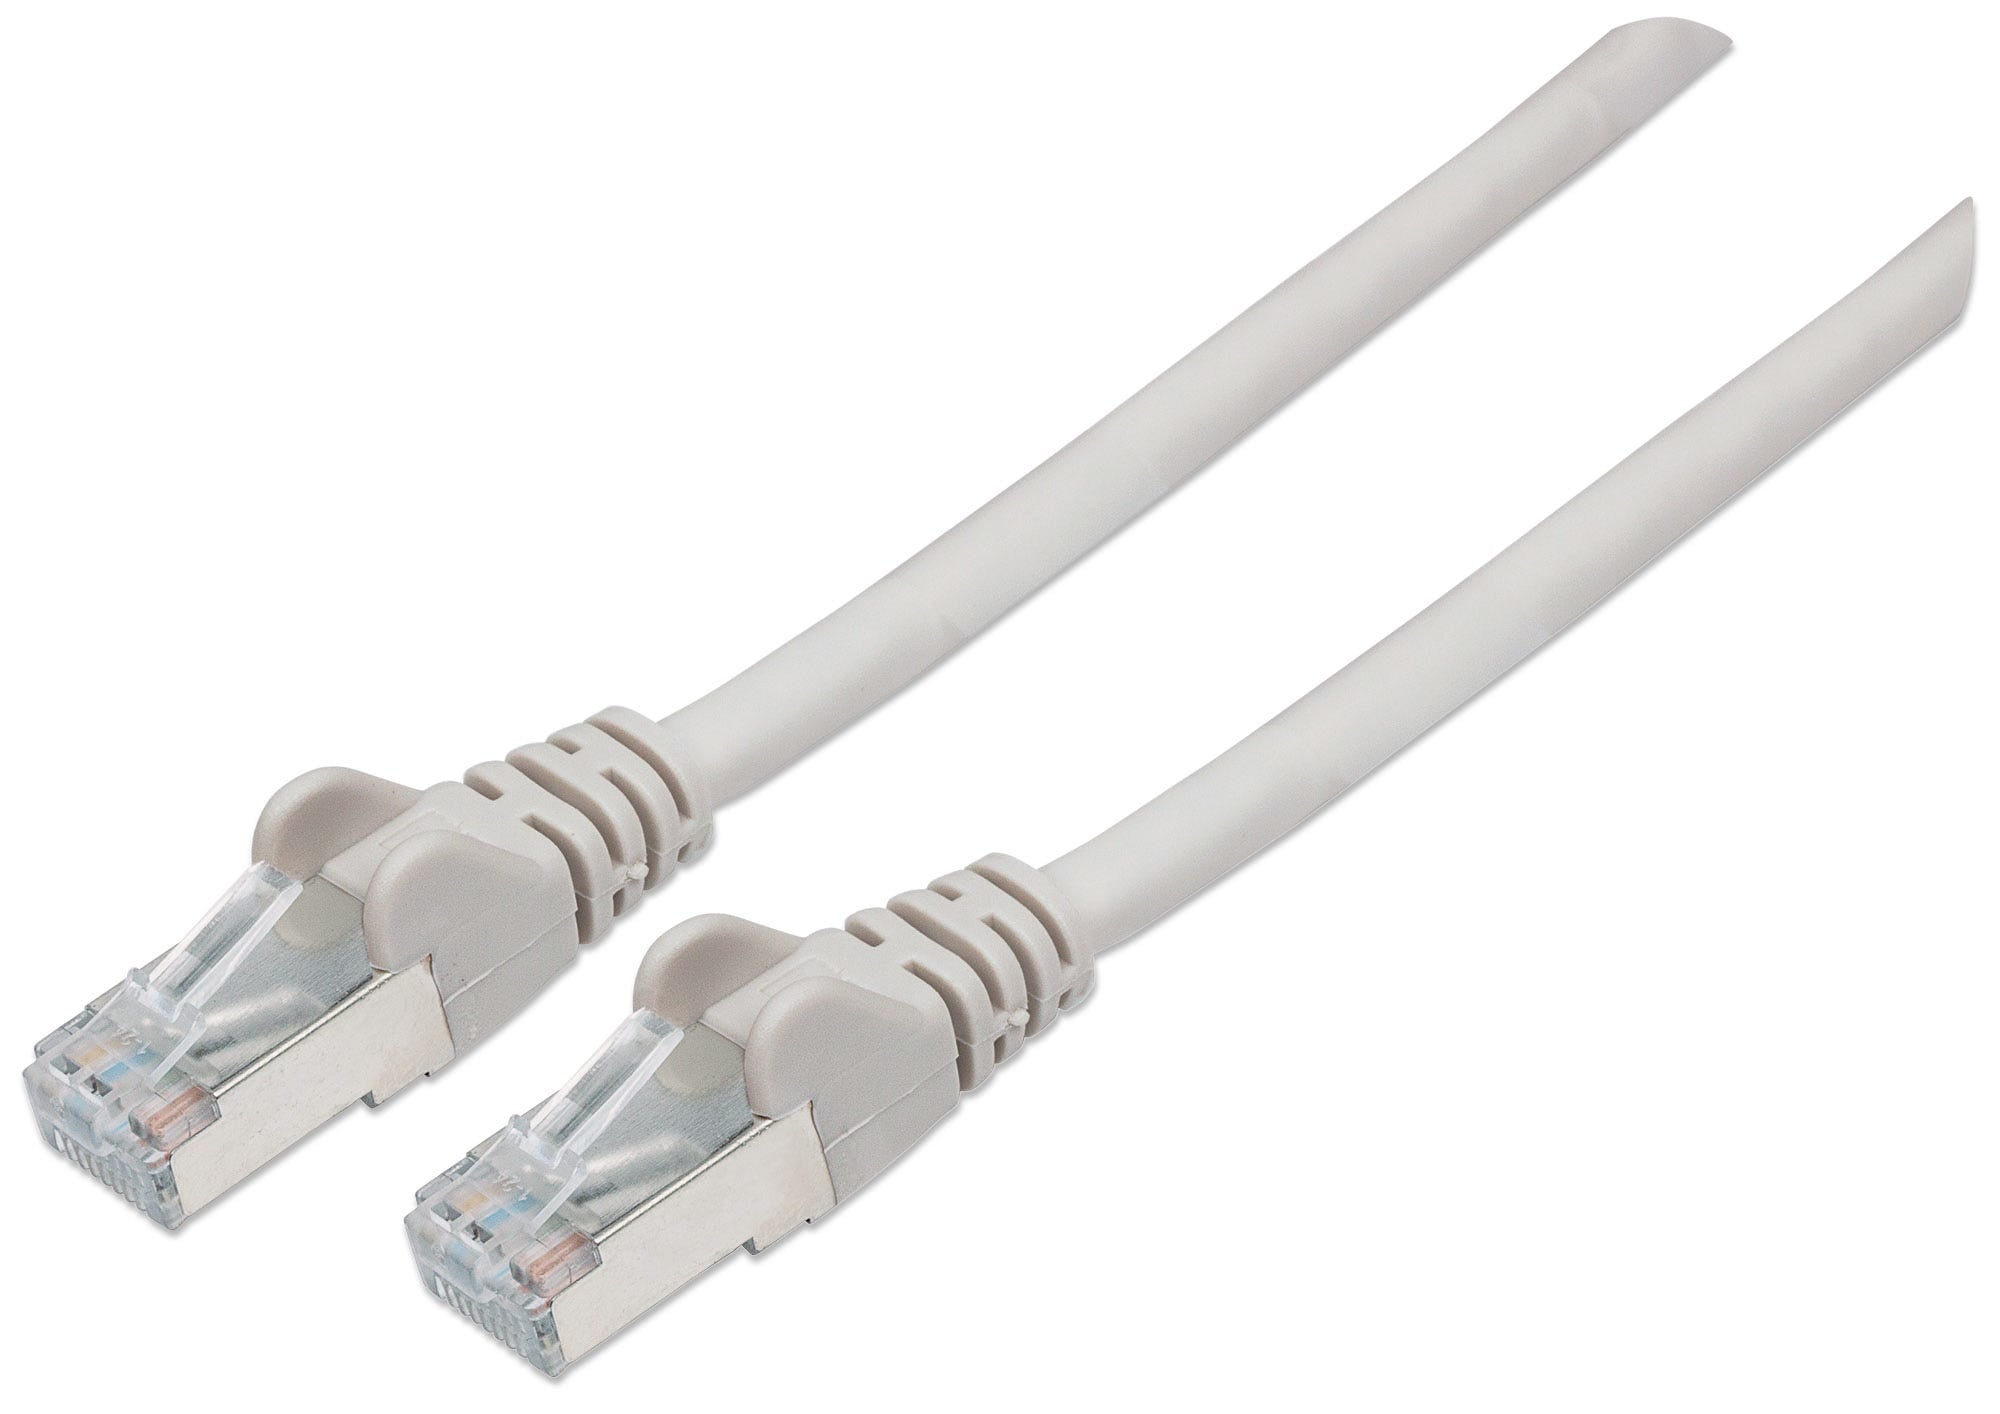 Intellinet Network Patch Cable, Cat6A, 1.5m, Grey, Copper, S/FTP, LSOH / LSZH, PVC, RJ45, Gold Plated Contacts, Snagless, Booted, Lifetime Warranty, Polybag